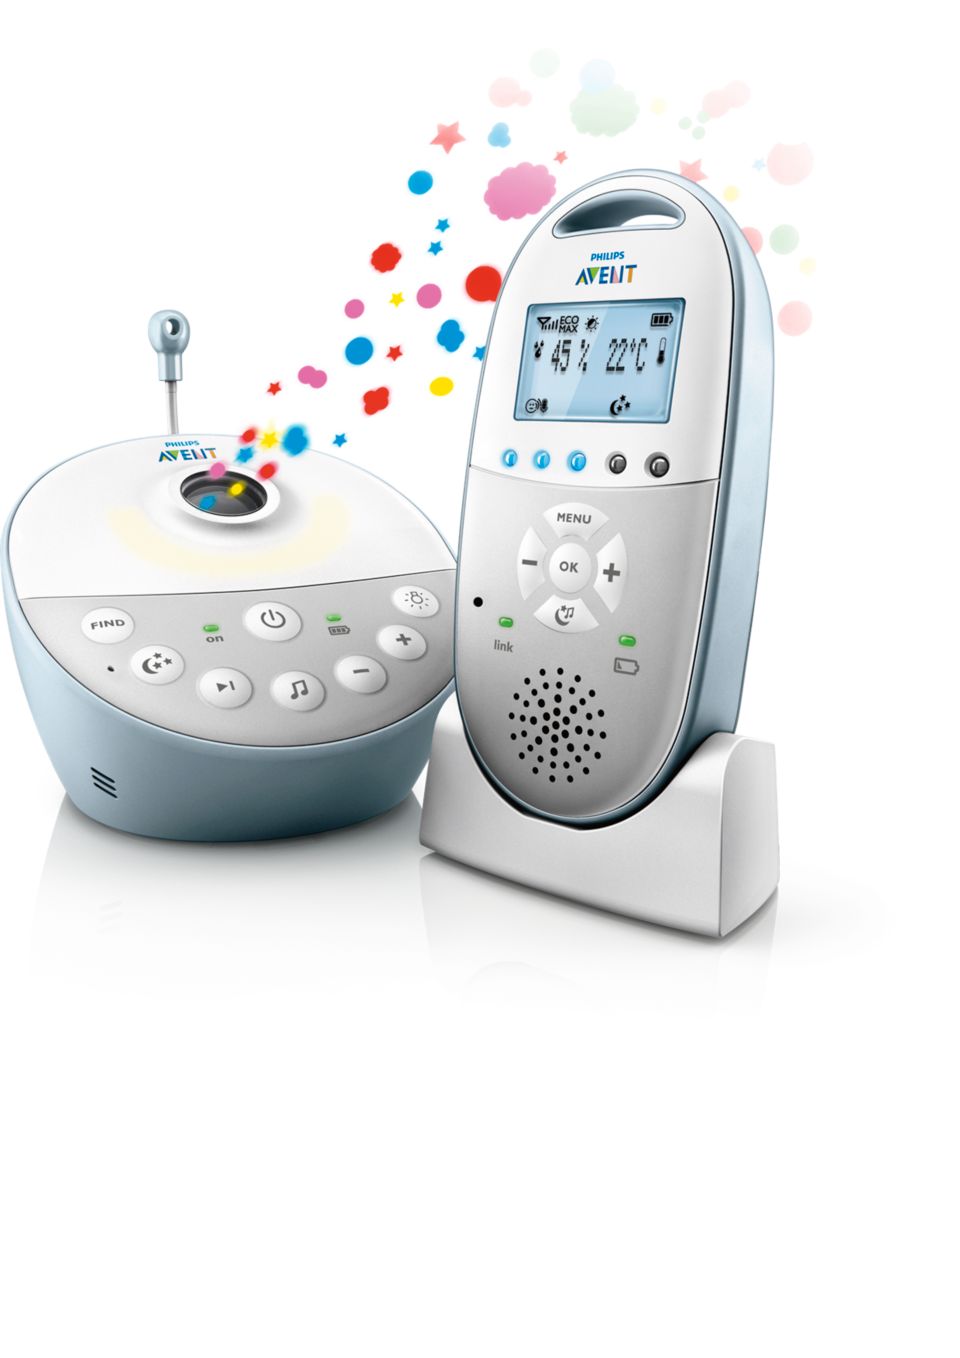 Audio DECT Baby Monitor